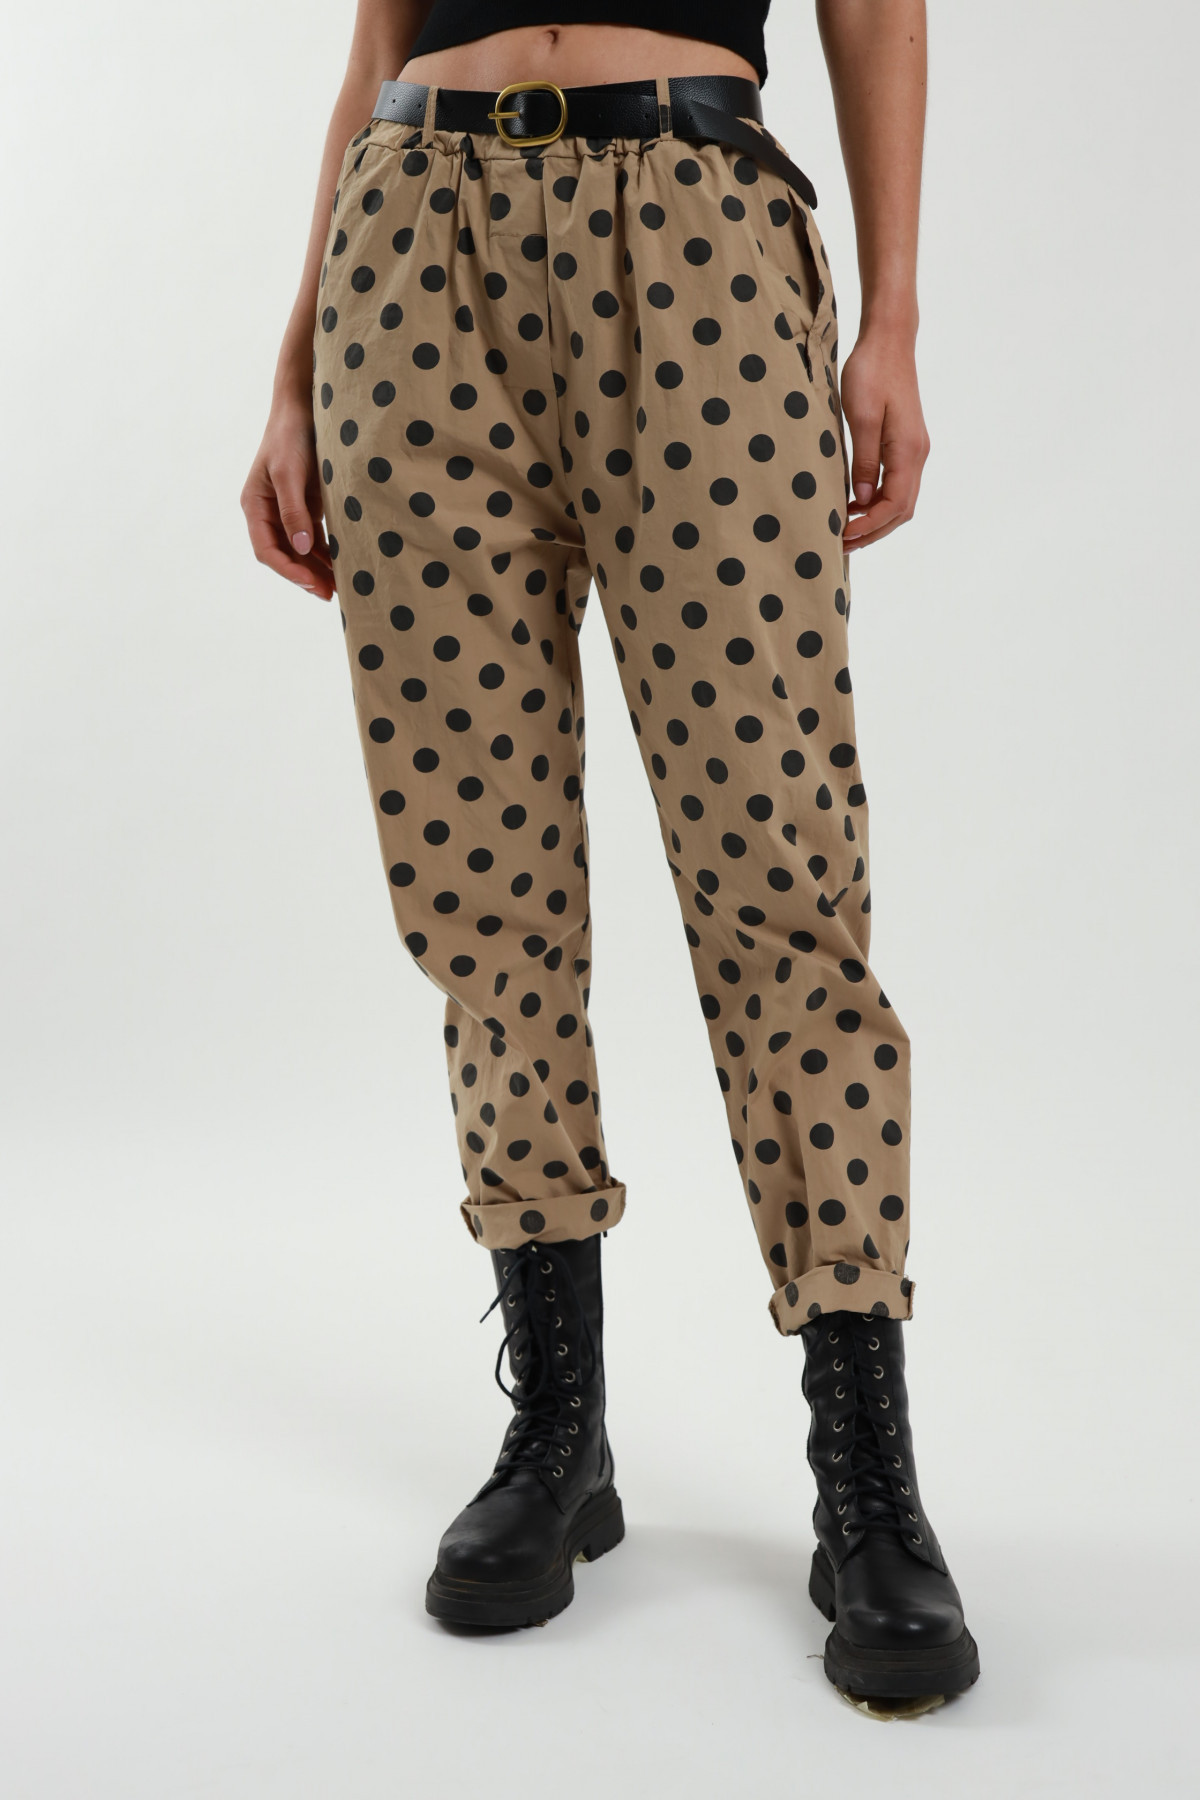 Polka dot trousers with belt